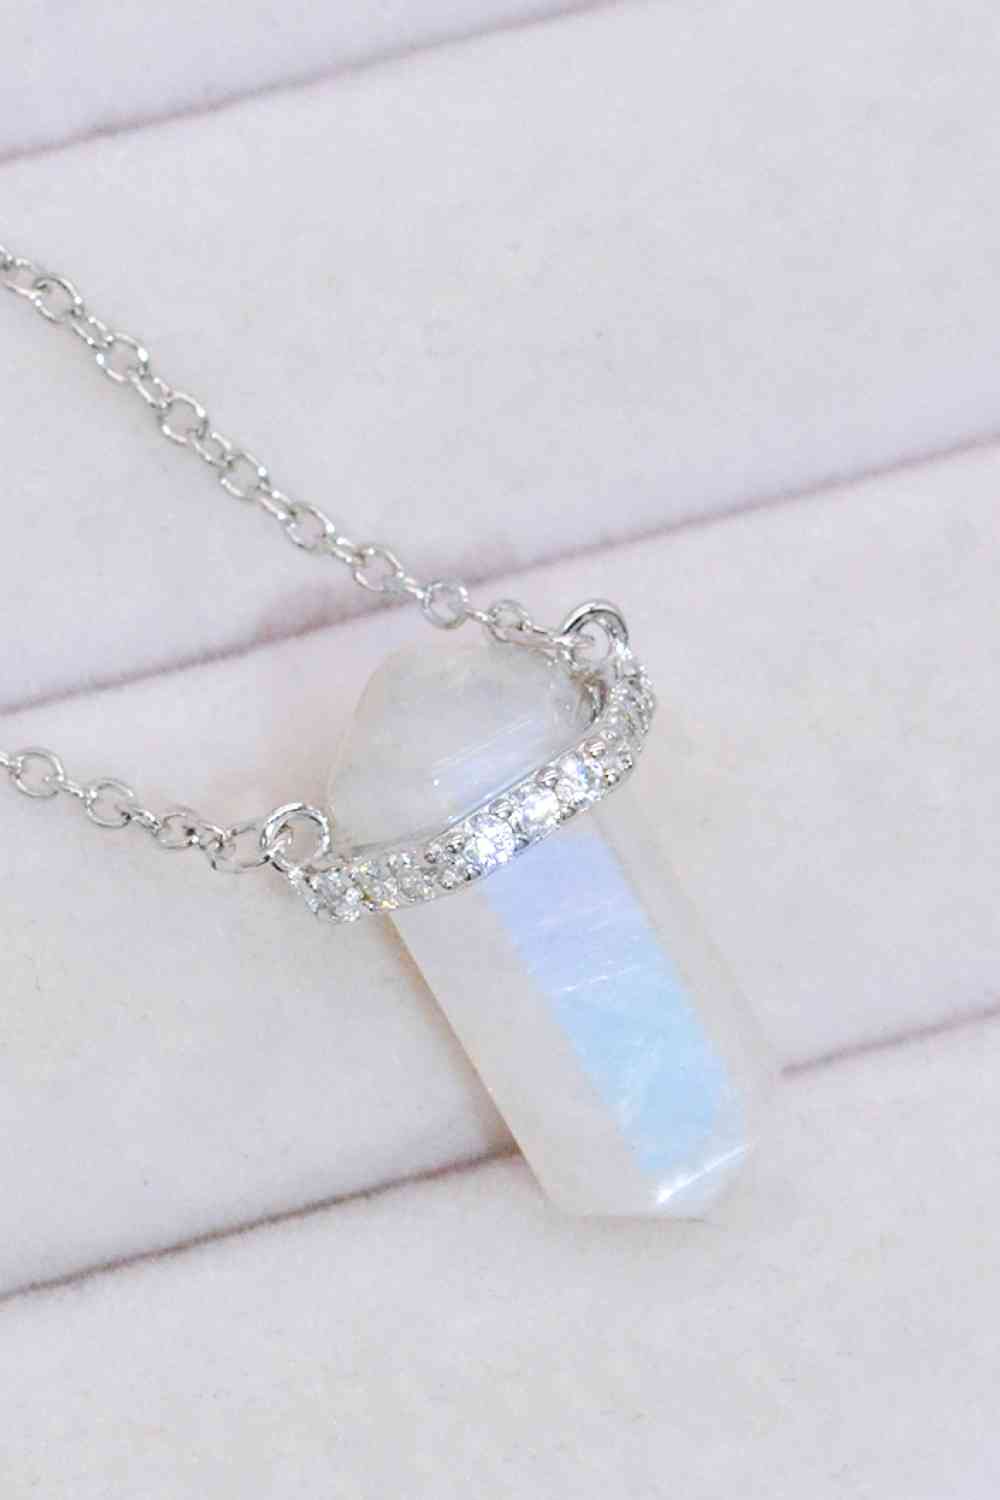 Stylish Necklace Made of Natural Moonstone, Sterling Silver or 18k Rose Gold-Plated